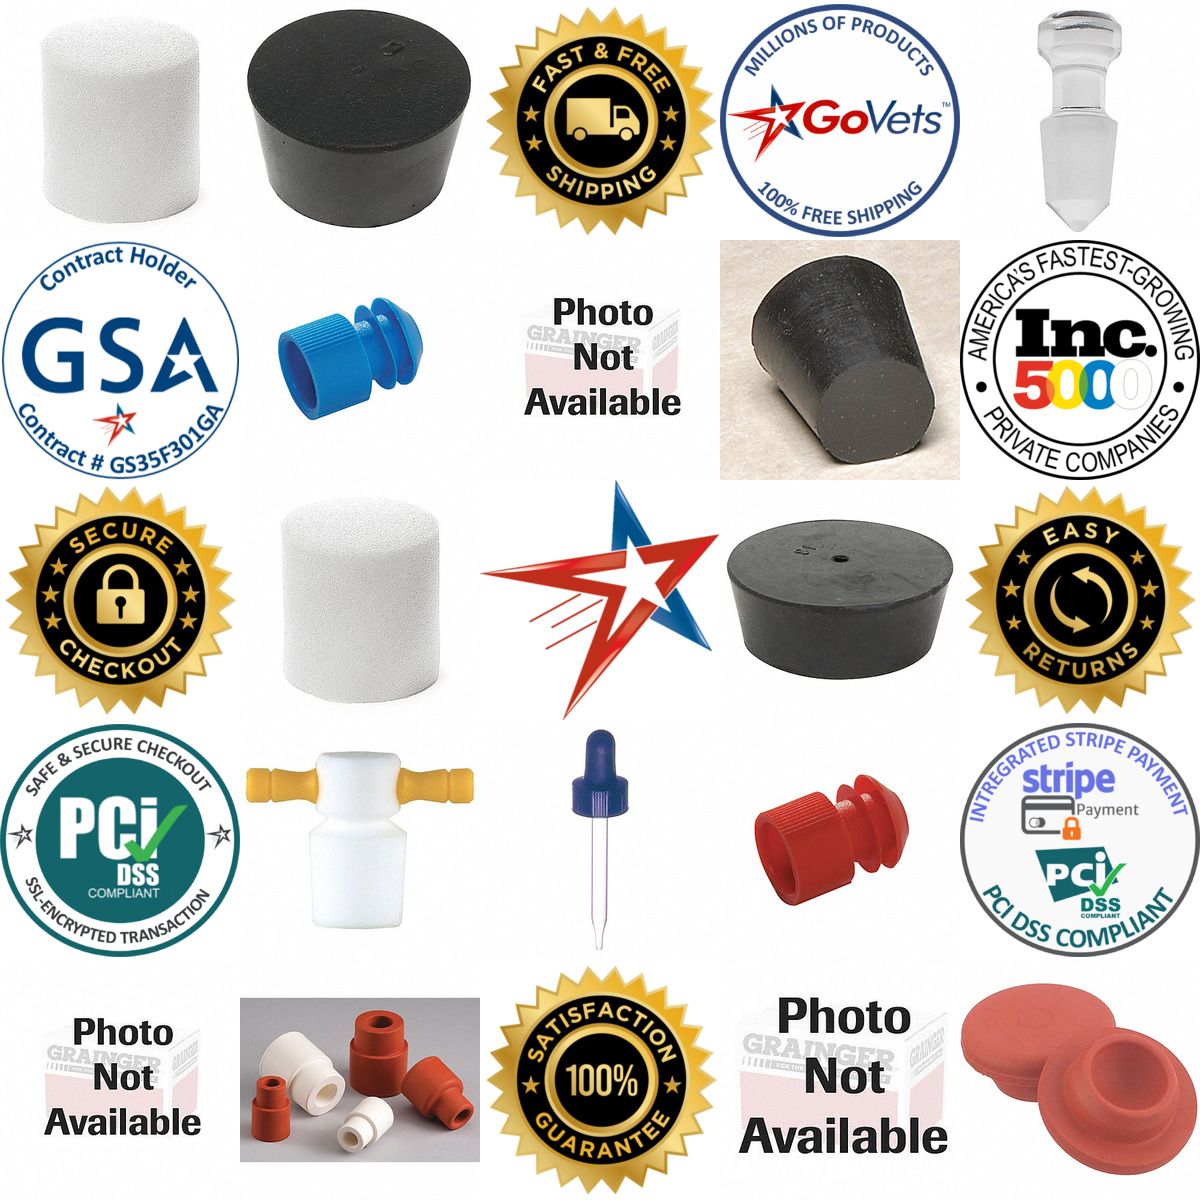 A selection of Stoppers products on GoVets